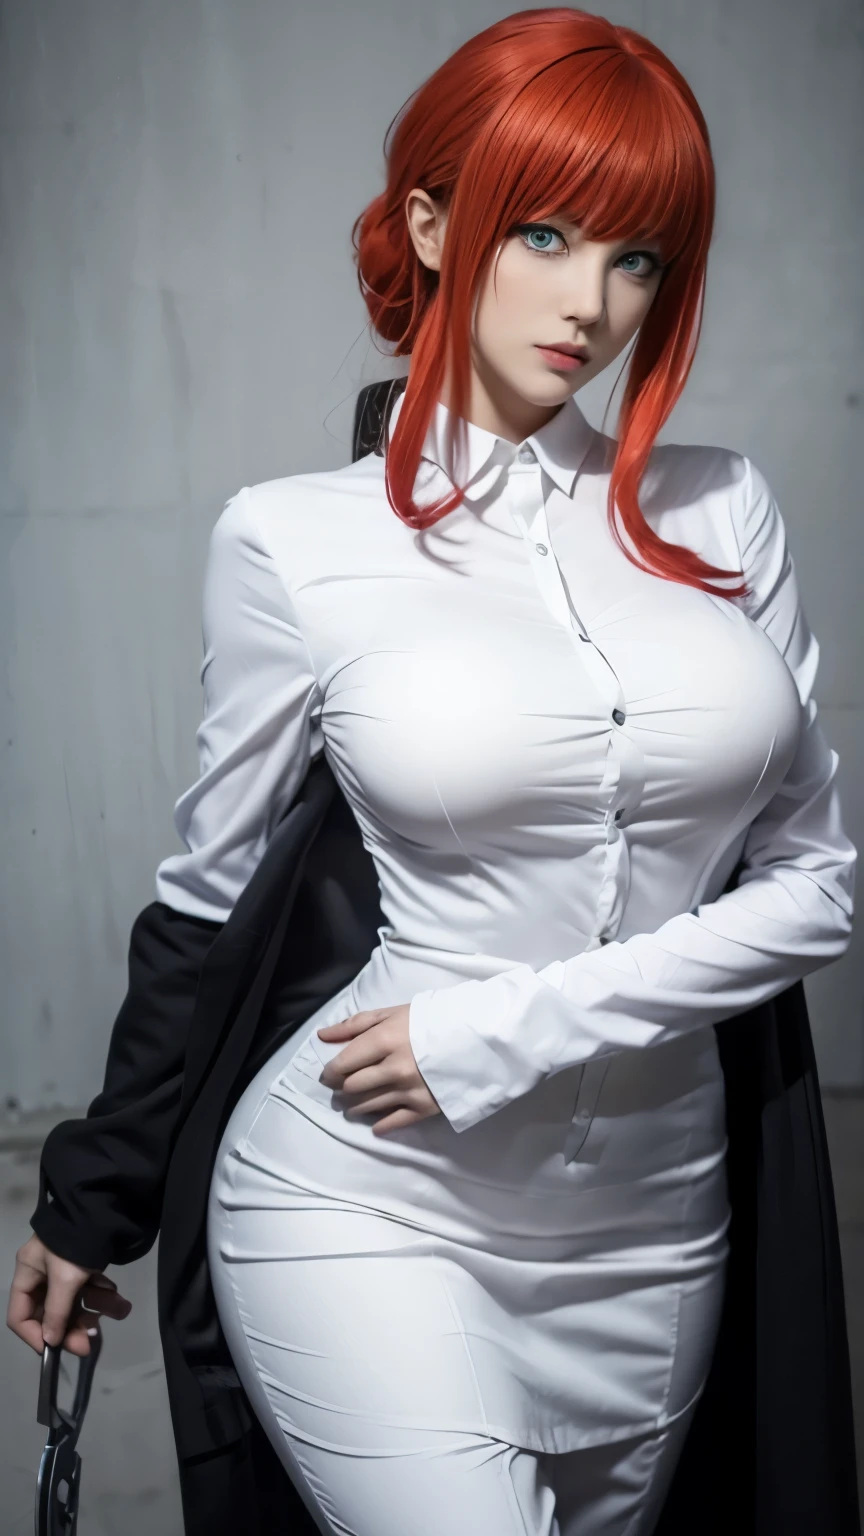 , ((anime cosplay)), 1 girl, wide range photoshoot, wide range, (milf), beautiful face, clear face, ((hot body)), ((makima dress)), Wearing office suit, ((white full sleeve shirt and full leg black pant)), ((chainsaw man)), ((assassin suit dress)), ((cosplay dress)), ((((Huge breasts: 0.8)))), ((no breasts)), coverd, (((Realistic))), ((well dressed)), waist curve pose, front side, (8k, RAW photo, top quality, masterpiece), (Realistic, photorealistic: 1.9), ((Full body shot)), stylish pose, ((Highly detailed skin: 1.2)), ((Realistic: 1.9)), Photos, masterpieces, top quality, (beautiful blue eyes, gorgeous red hair, white skin, thick body, lower abdomen bristles, perfect slim figure), various poses, ultra-detailed face, detailed eyes, a lot of people are looking at her with excitement, (((no close-up)))